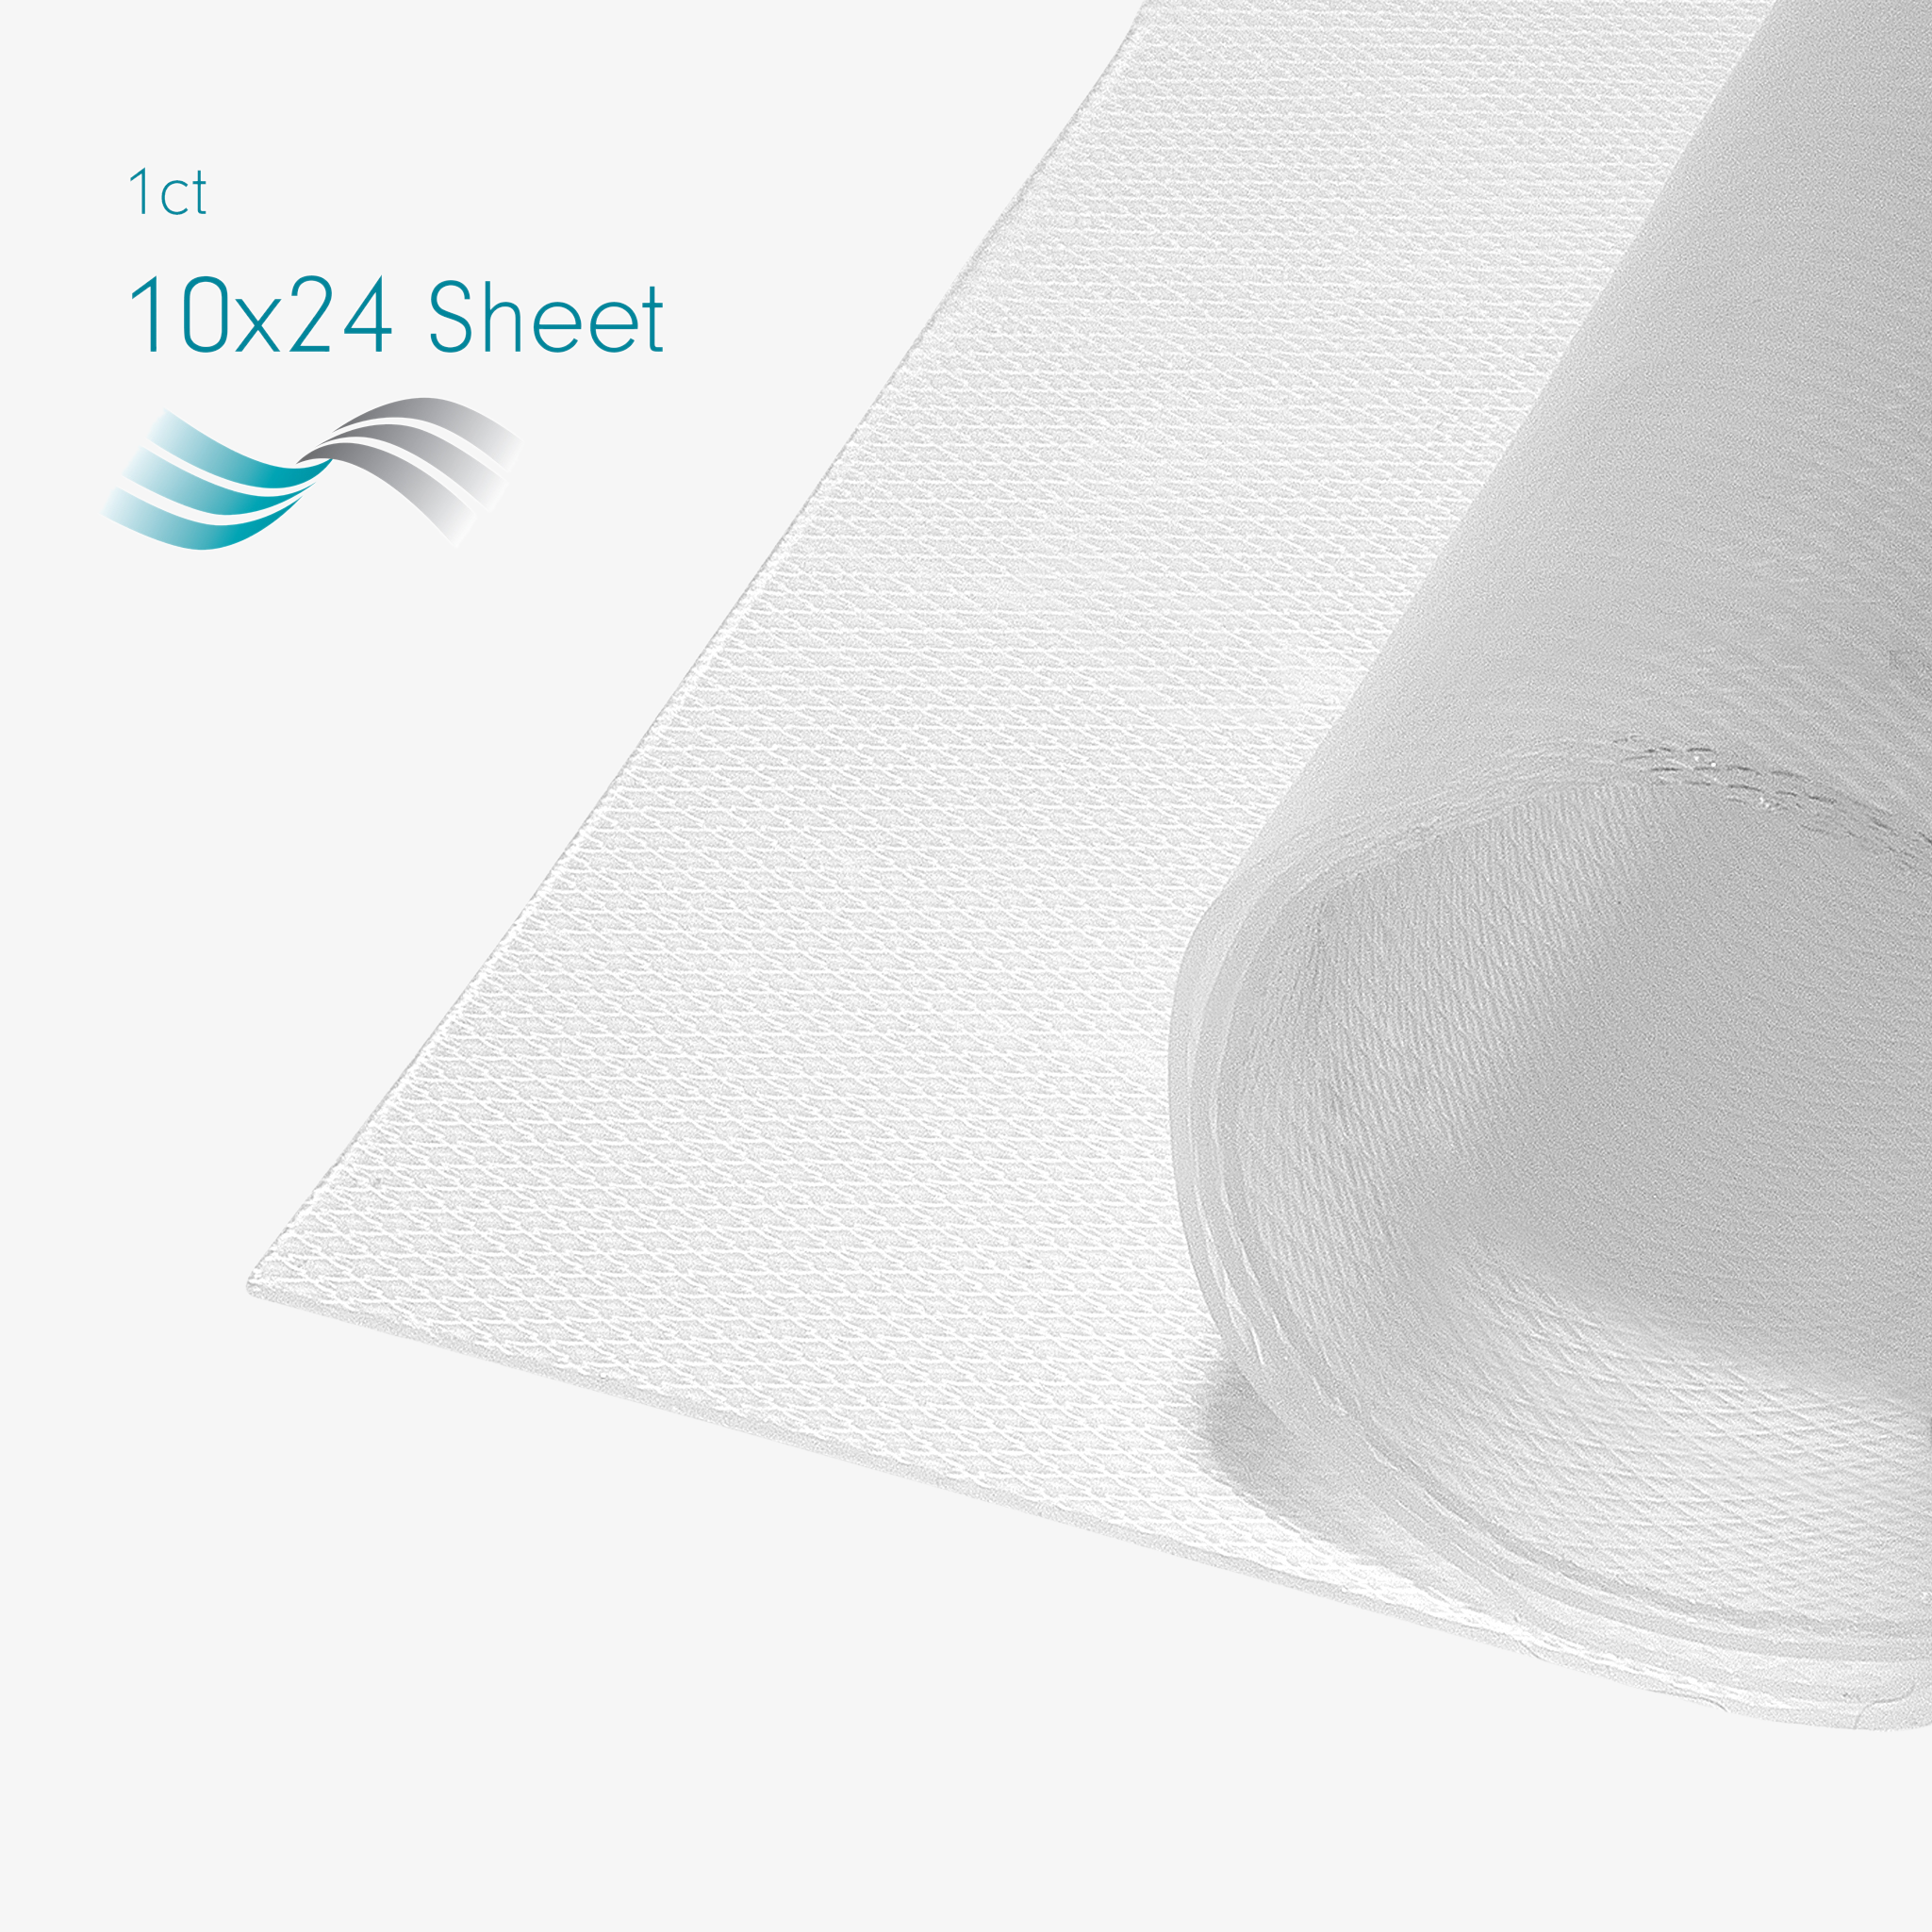 Advanced Medical-Grade Extra-Large 10" X 24" Silicone Sheet showing count of product | clear 